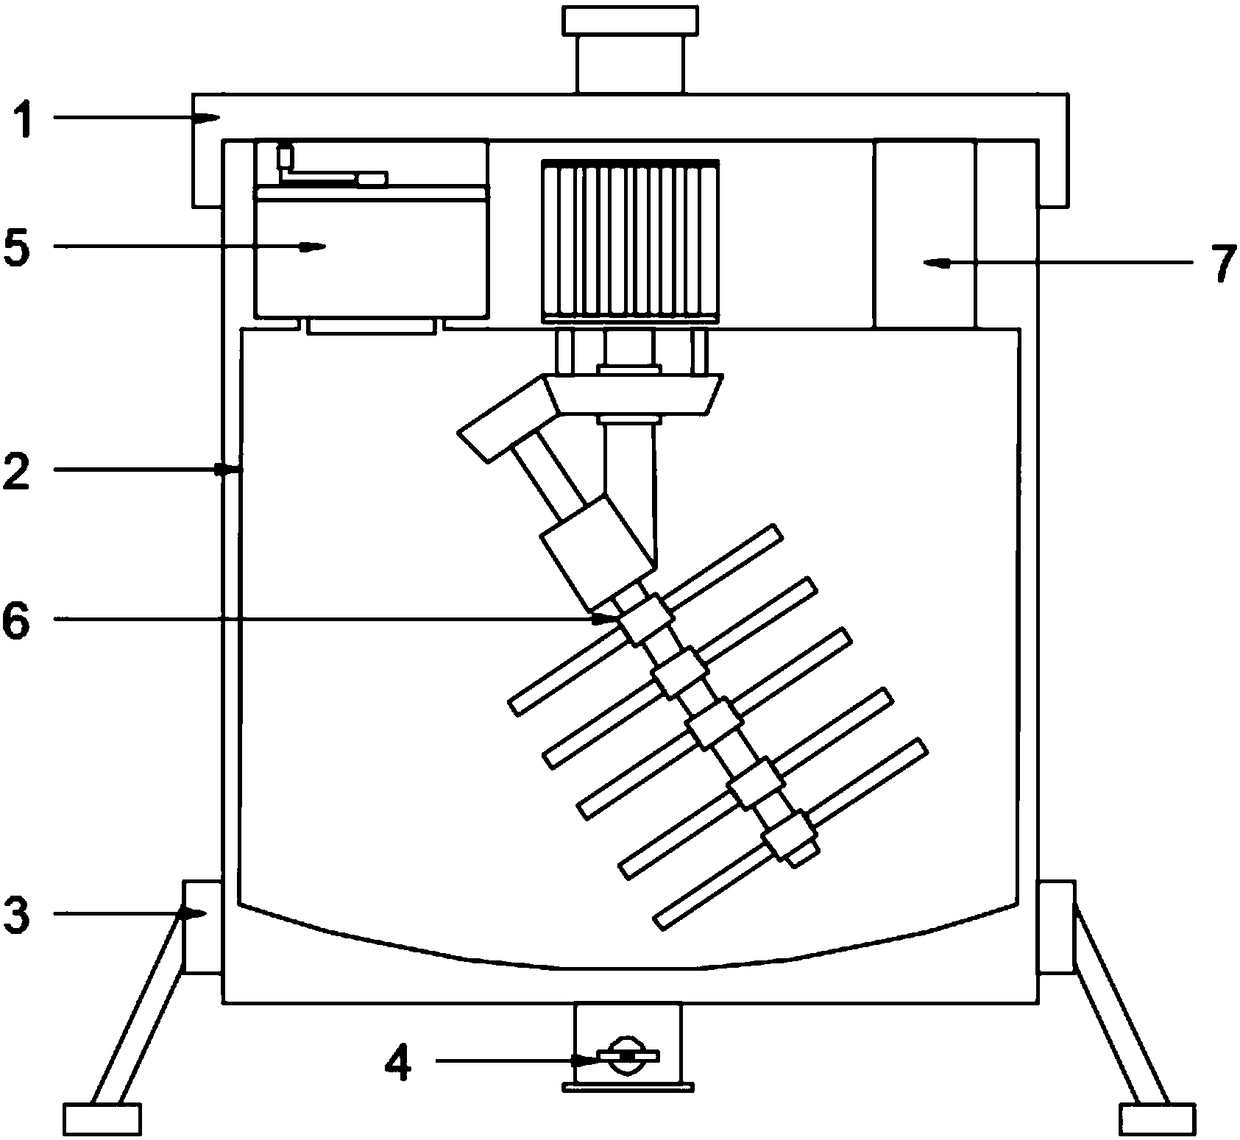 Auxiliary dissolving device for chemical experiment